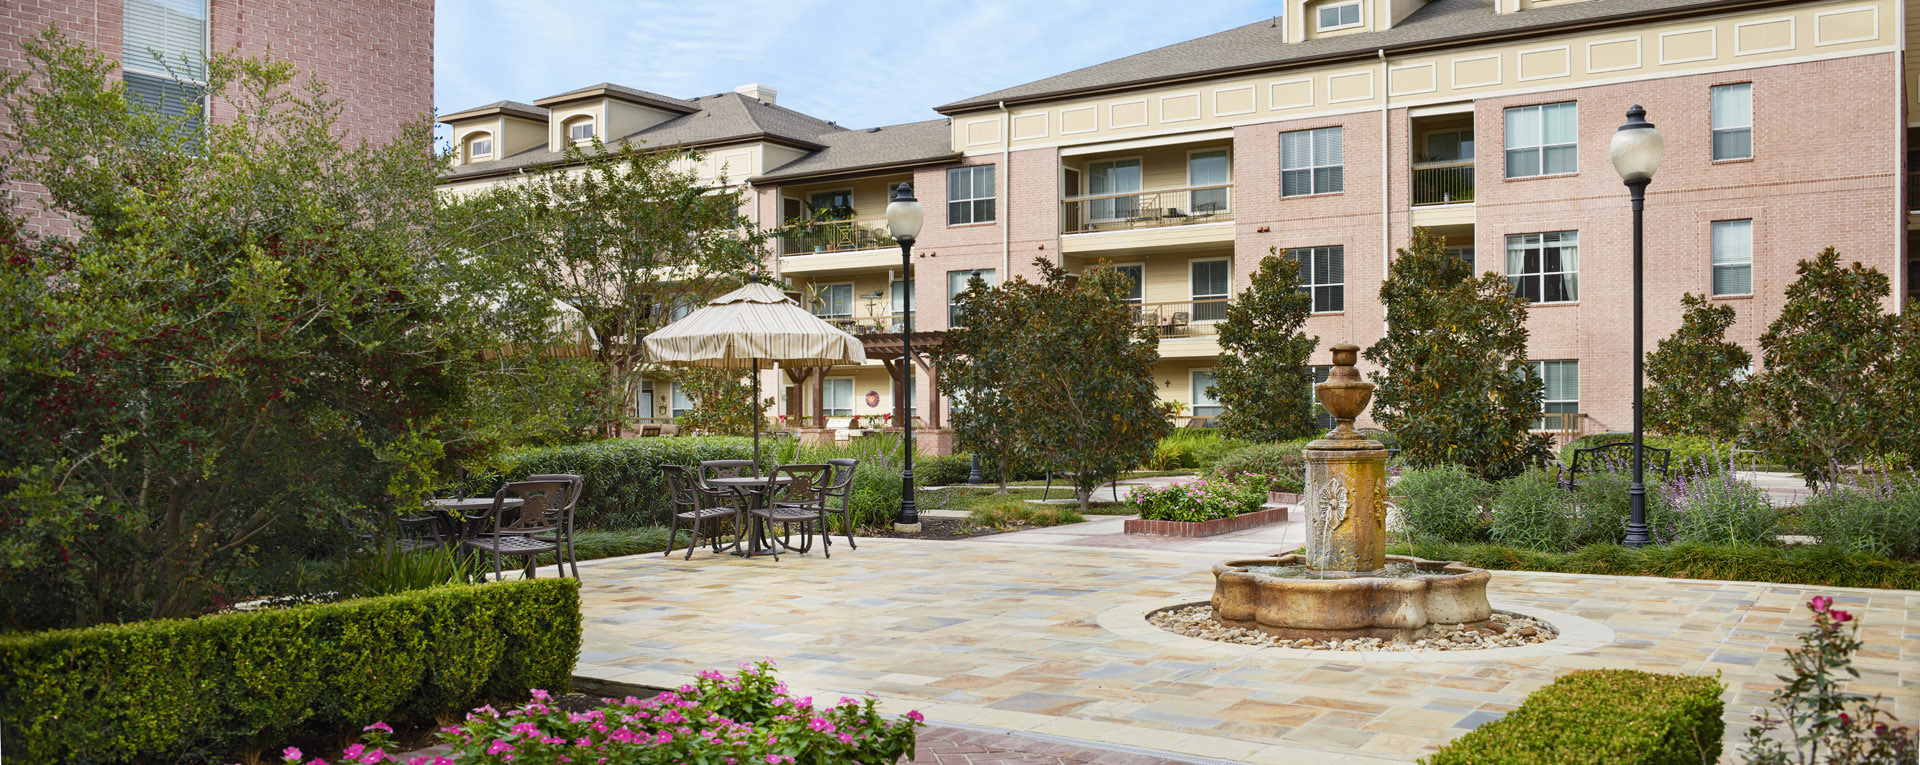 Courtyard and Patio in Camden Royal Oaks apartment complex